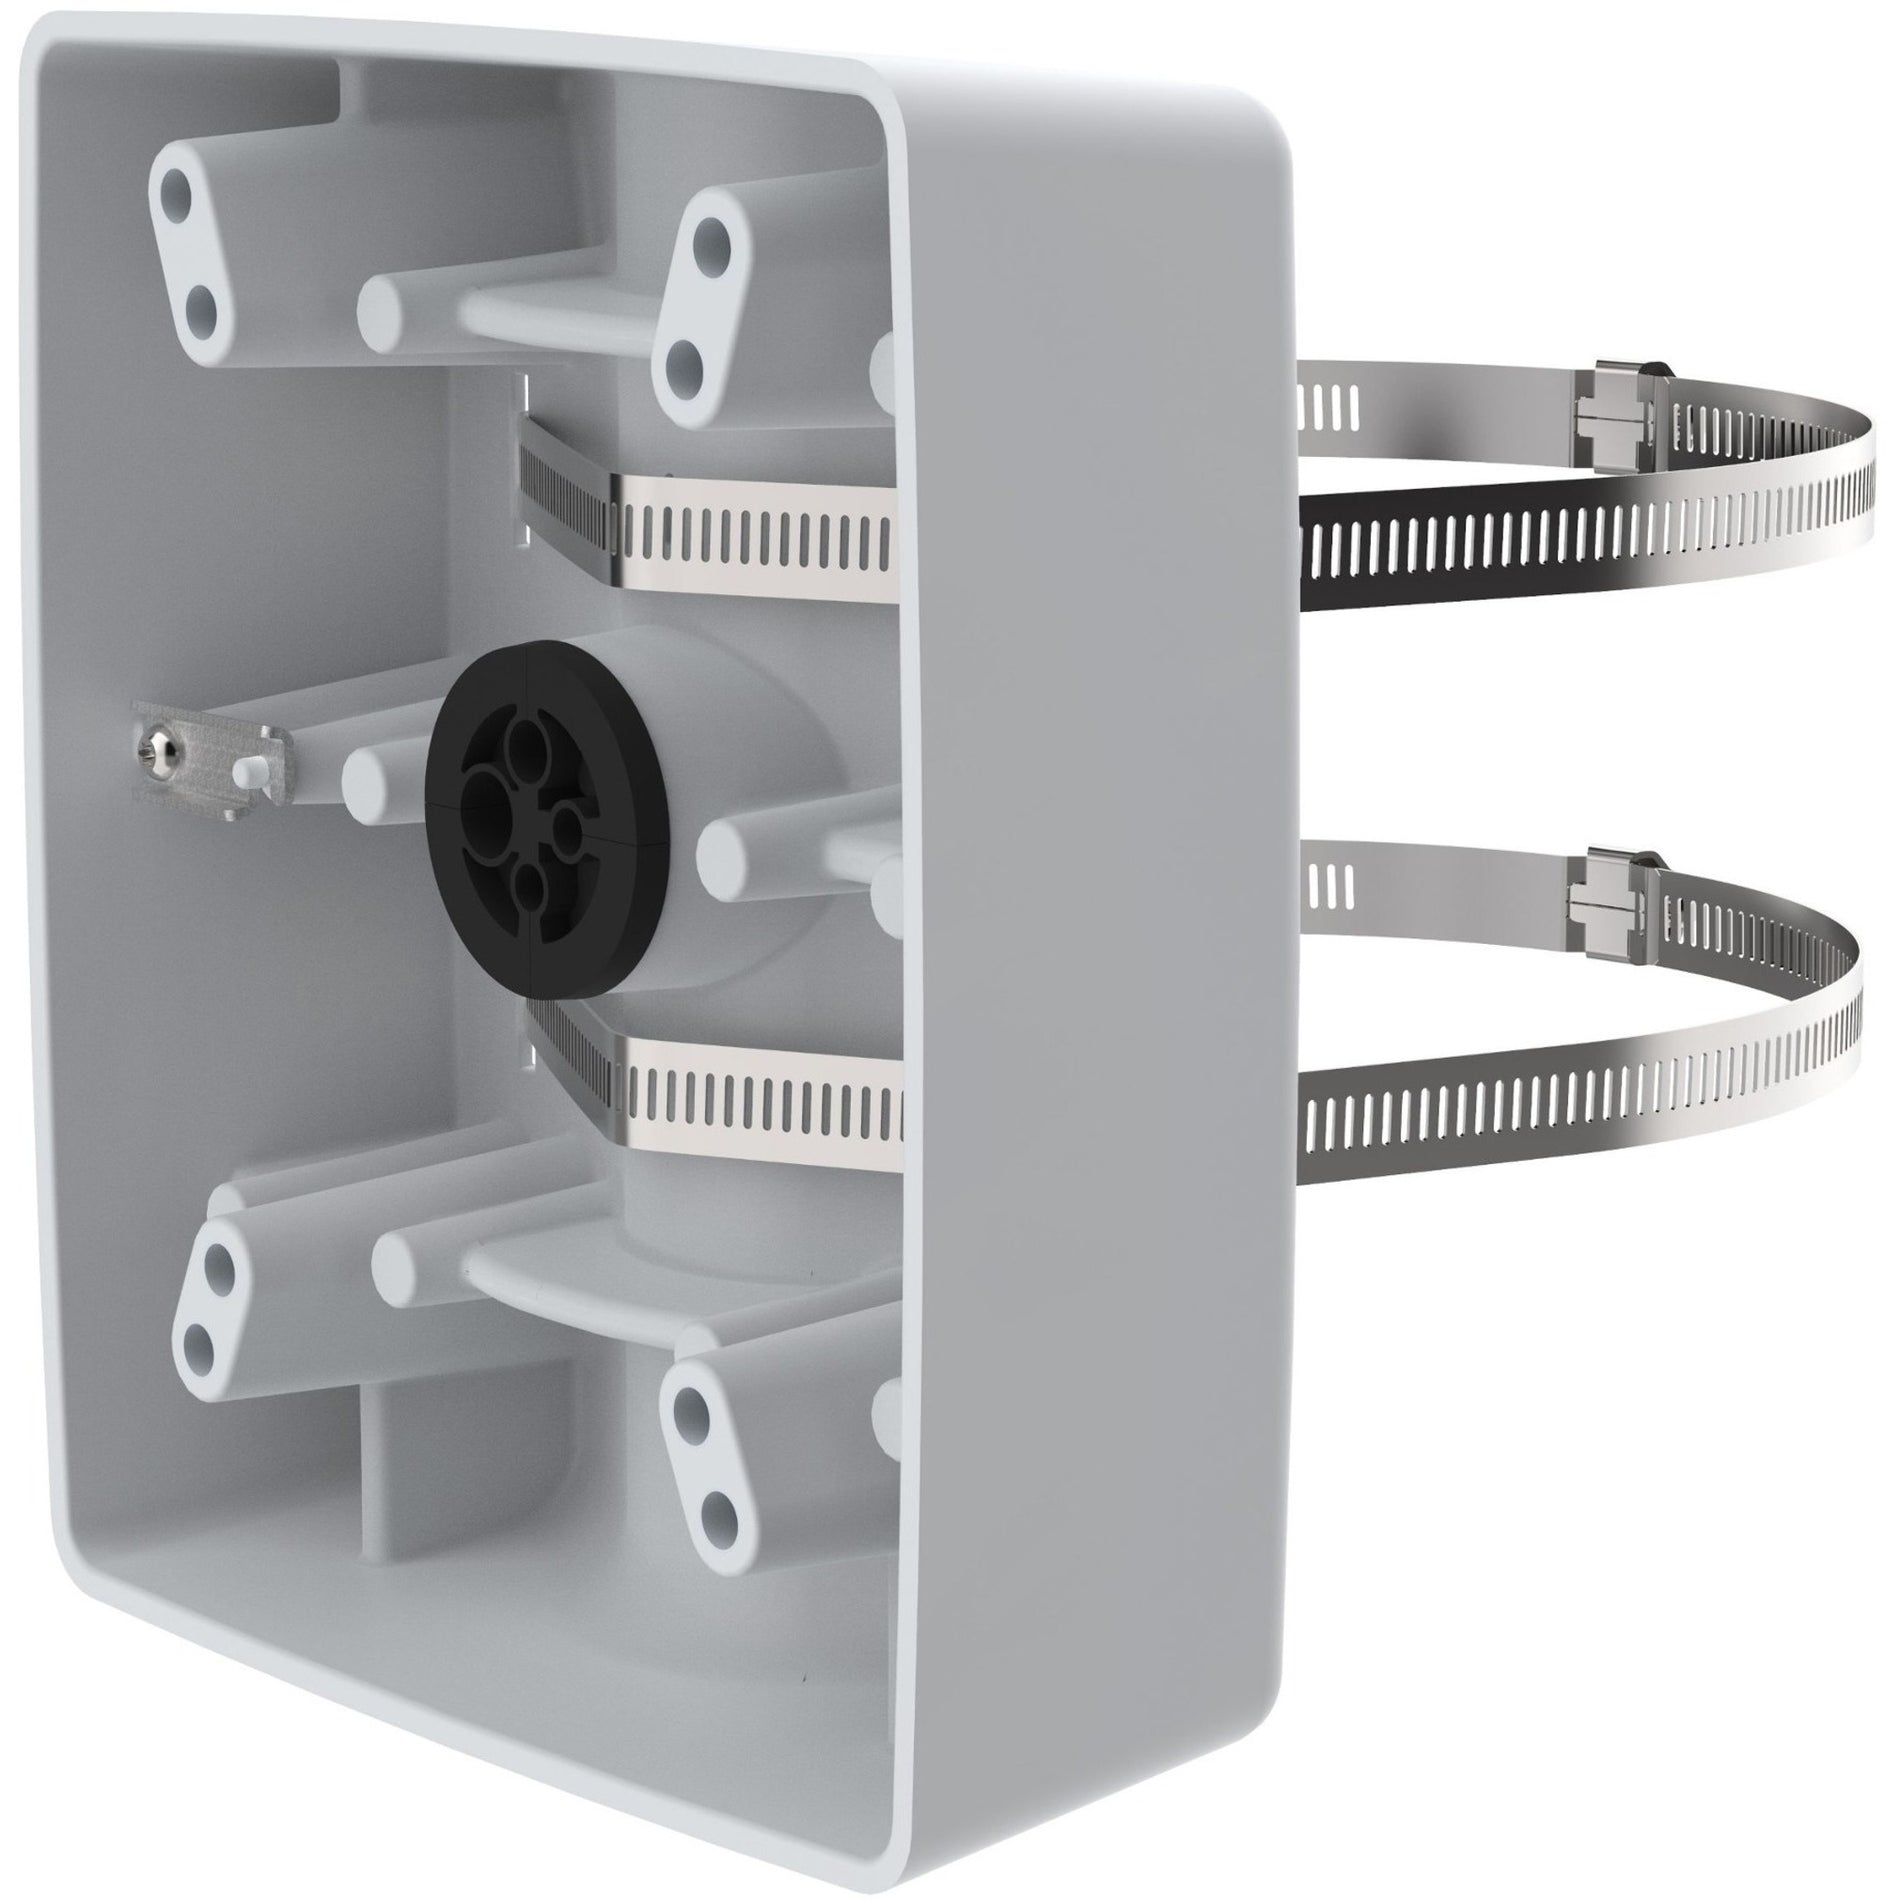 AXIS 01470-001 T91B57 Pole Mount for Relay Module, Surveillance Cabinet - Maximum Load Capacity 66.14 lb